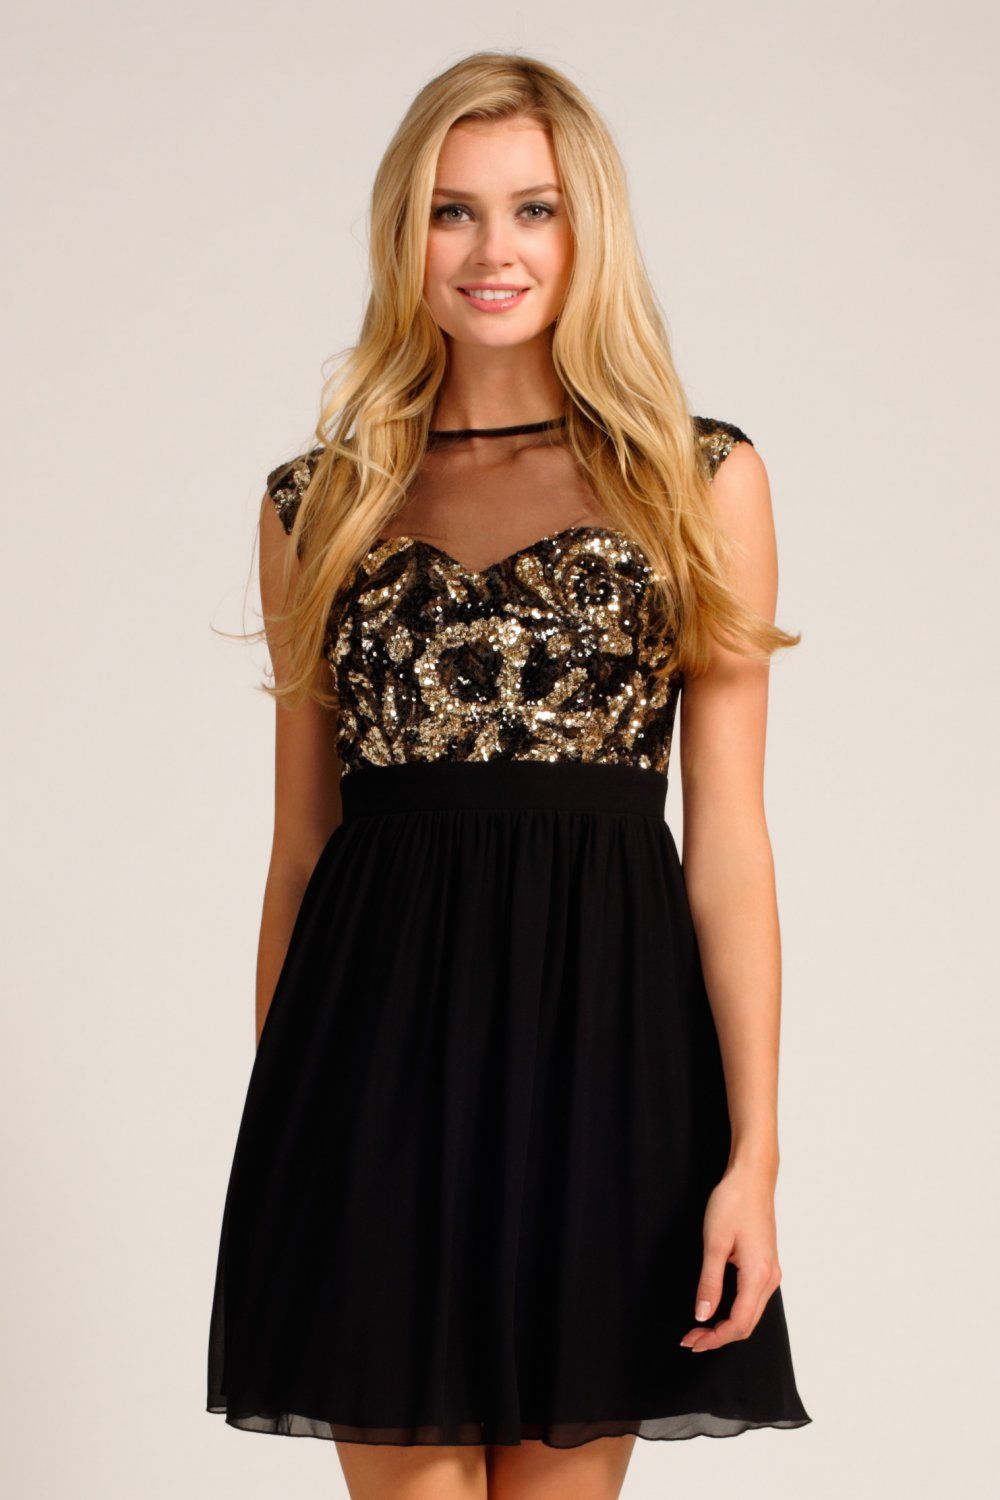 Make Yourself Look Stunning In A Black Prom Dresses My My